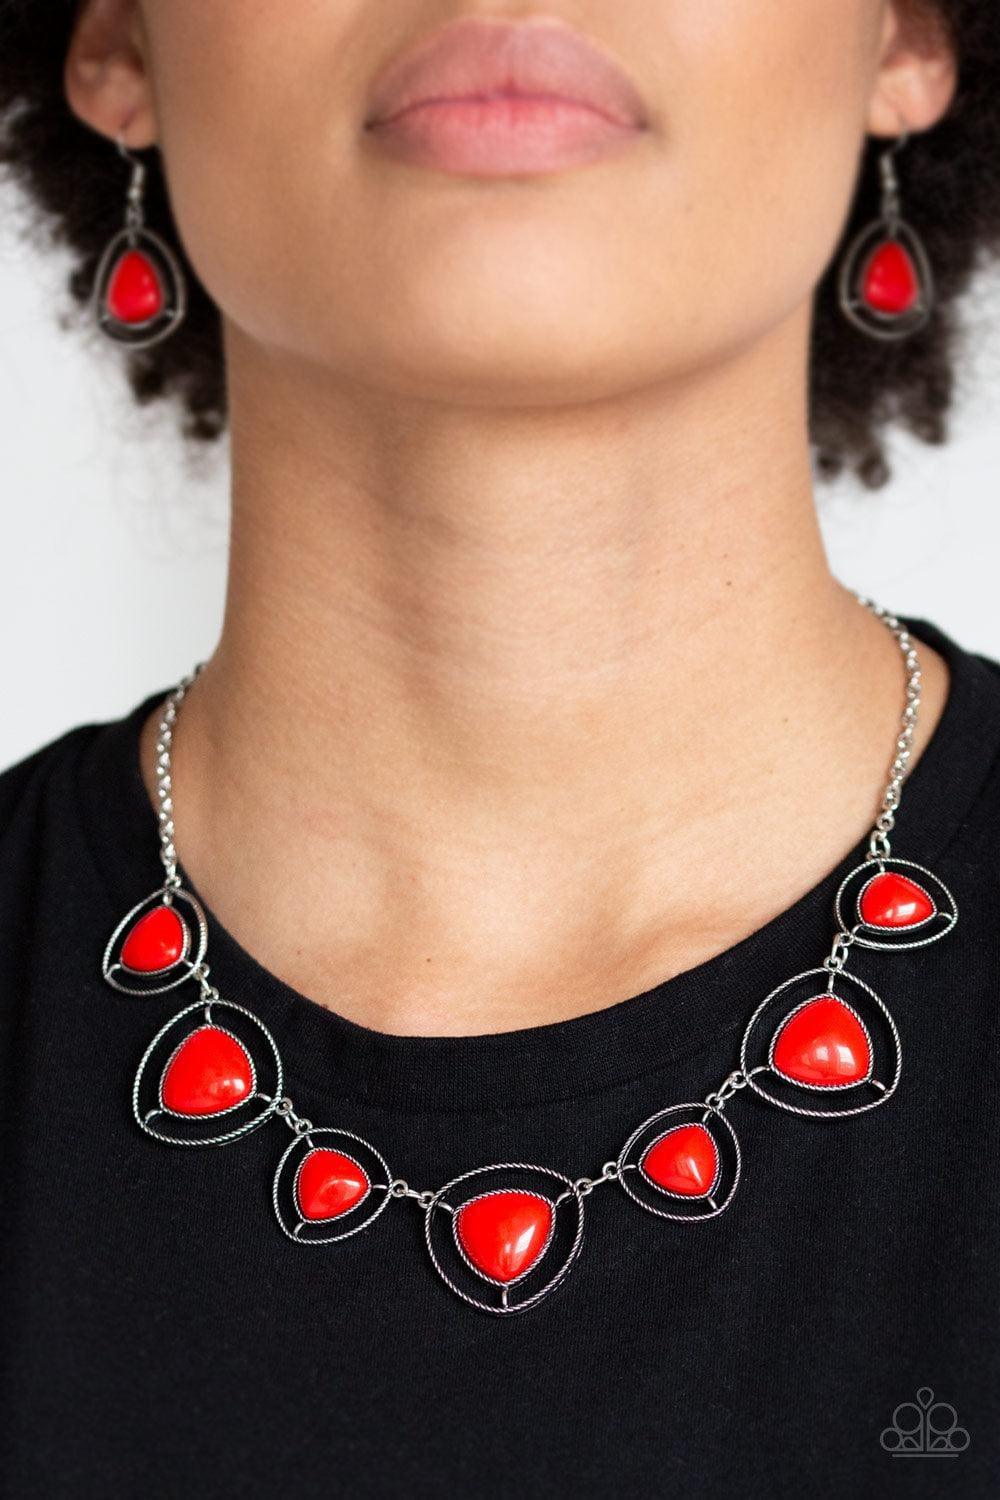 Paparazzi Accessories - Make a Point - Red Necklace - Bling by JessieK